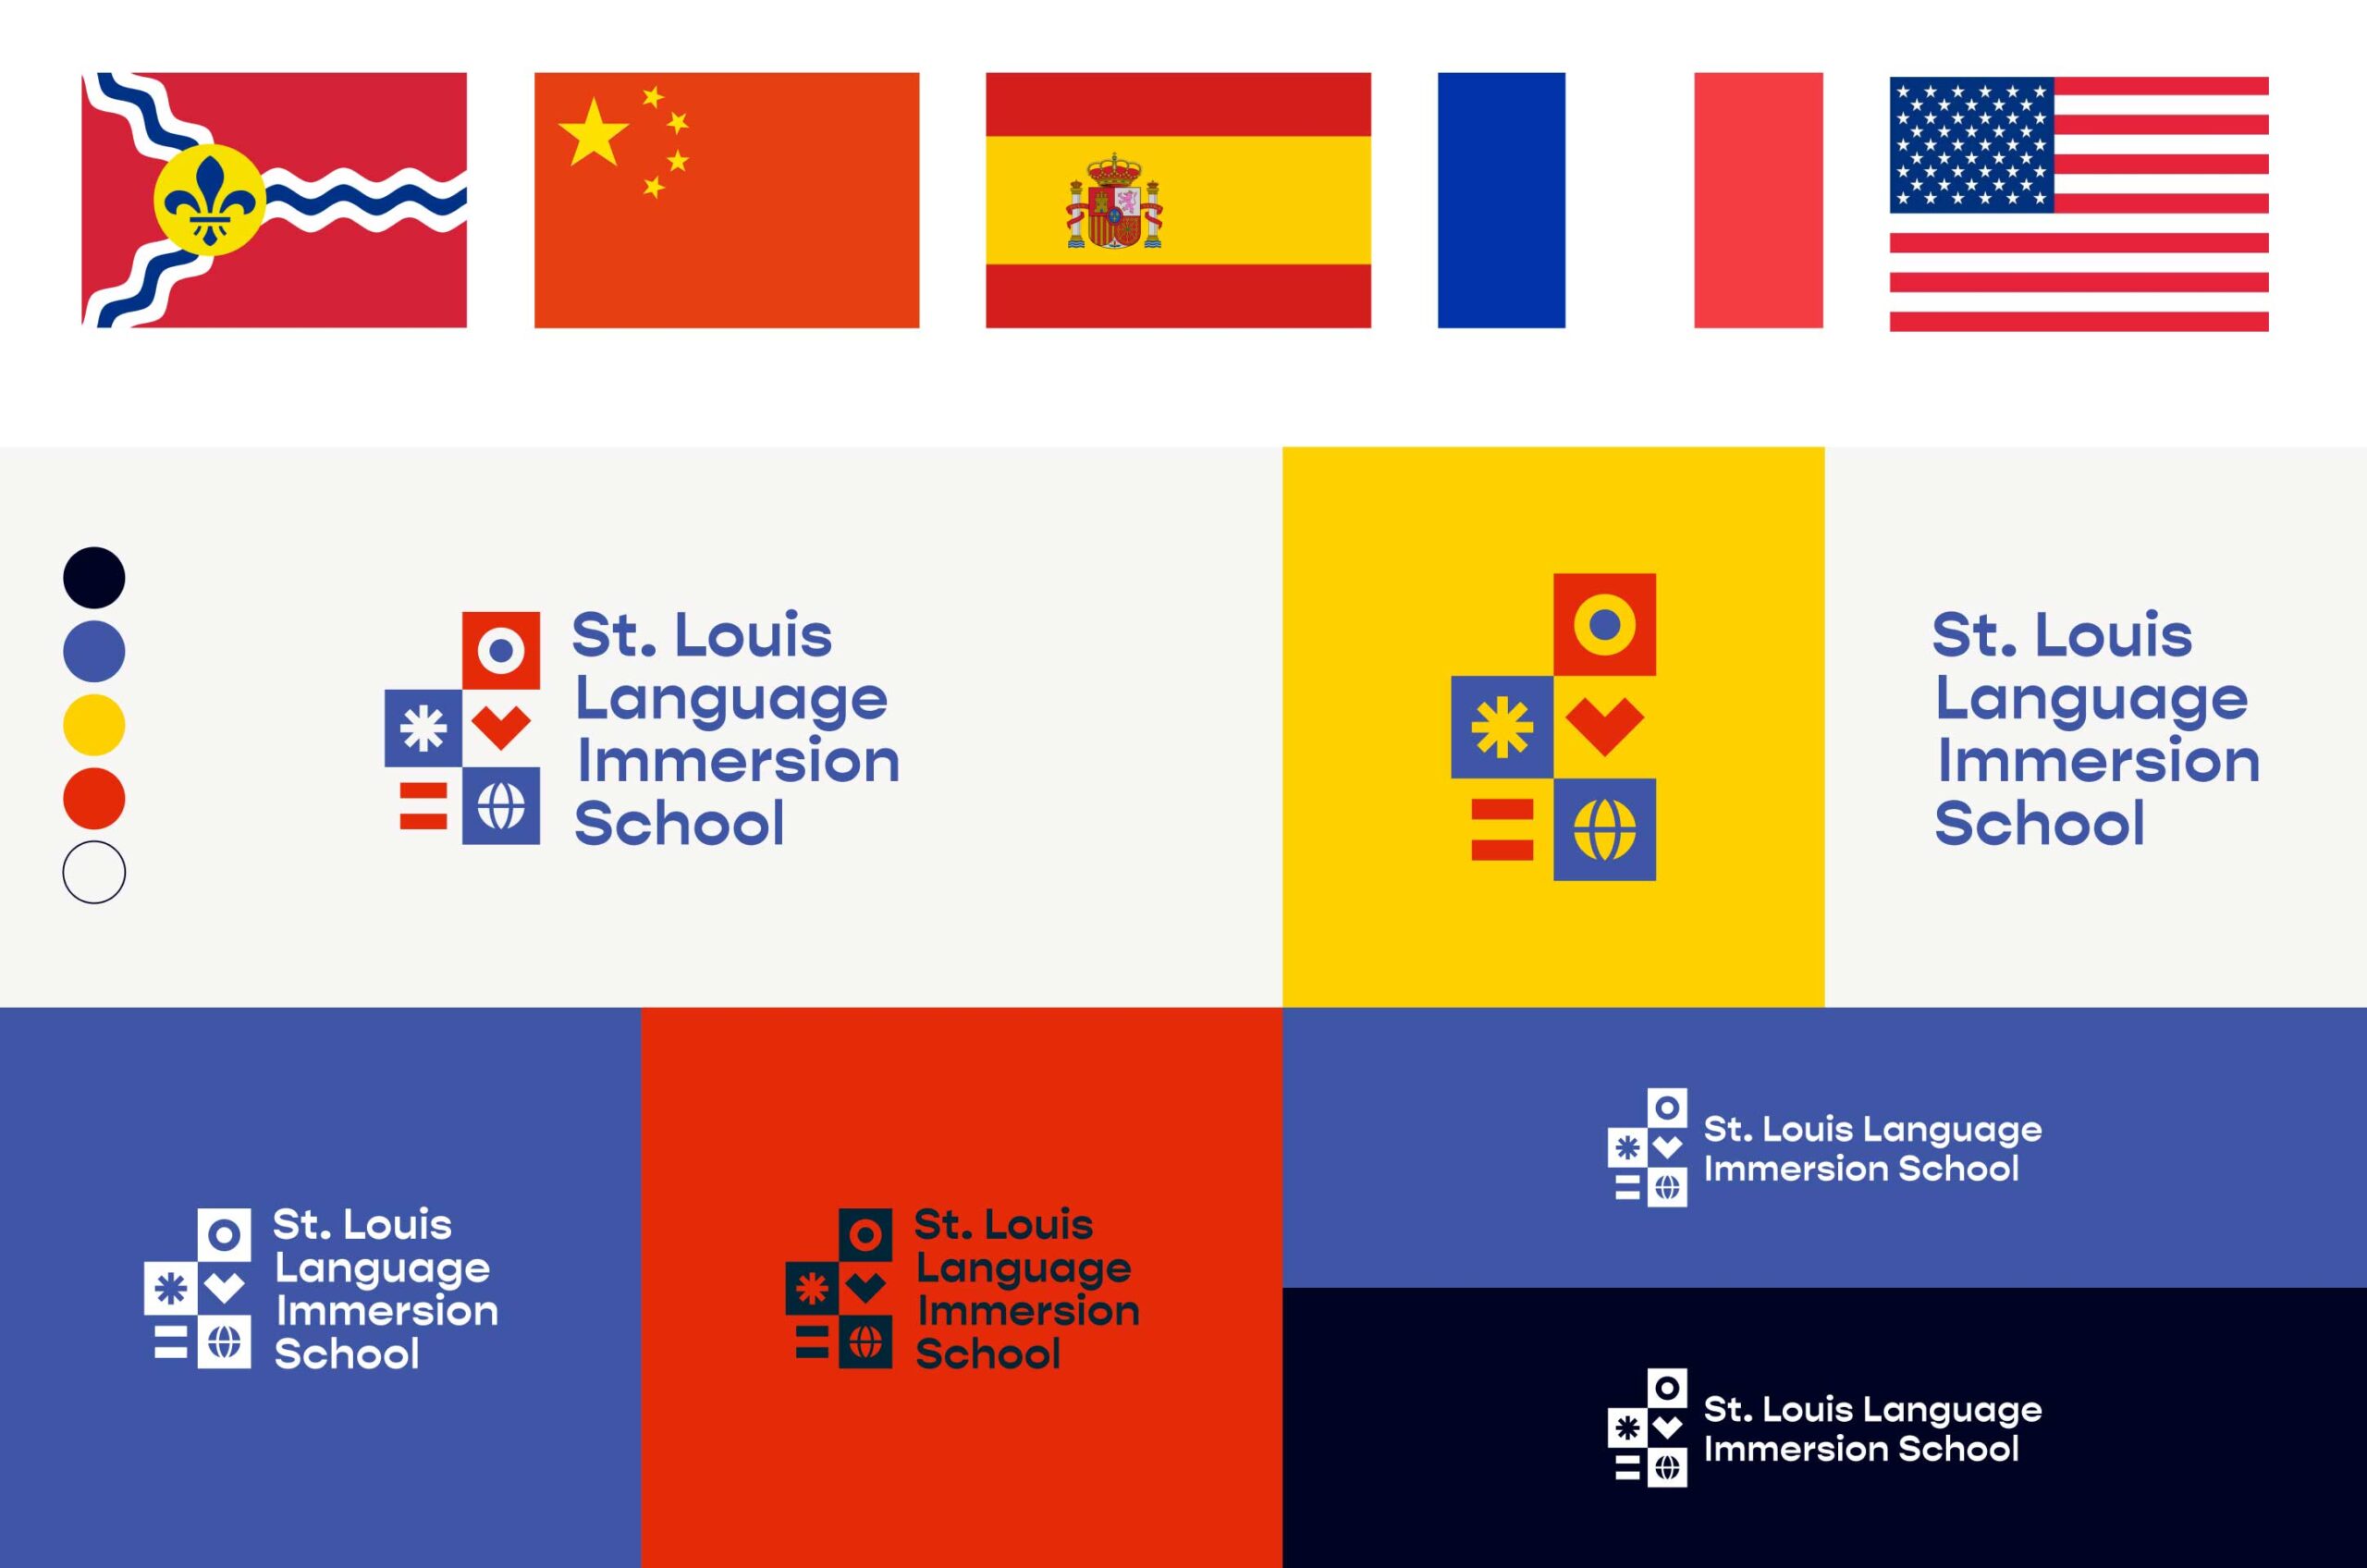 Multiple iterations of the St. Louis Language Immersion School branding, including visual inspiration from flags of multiple countries